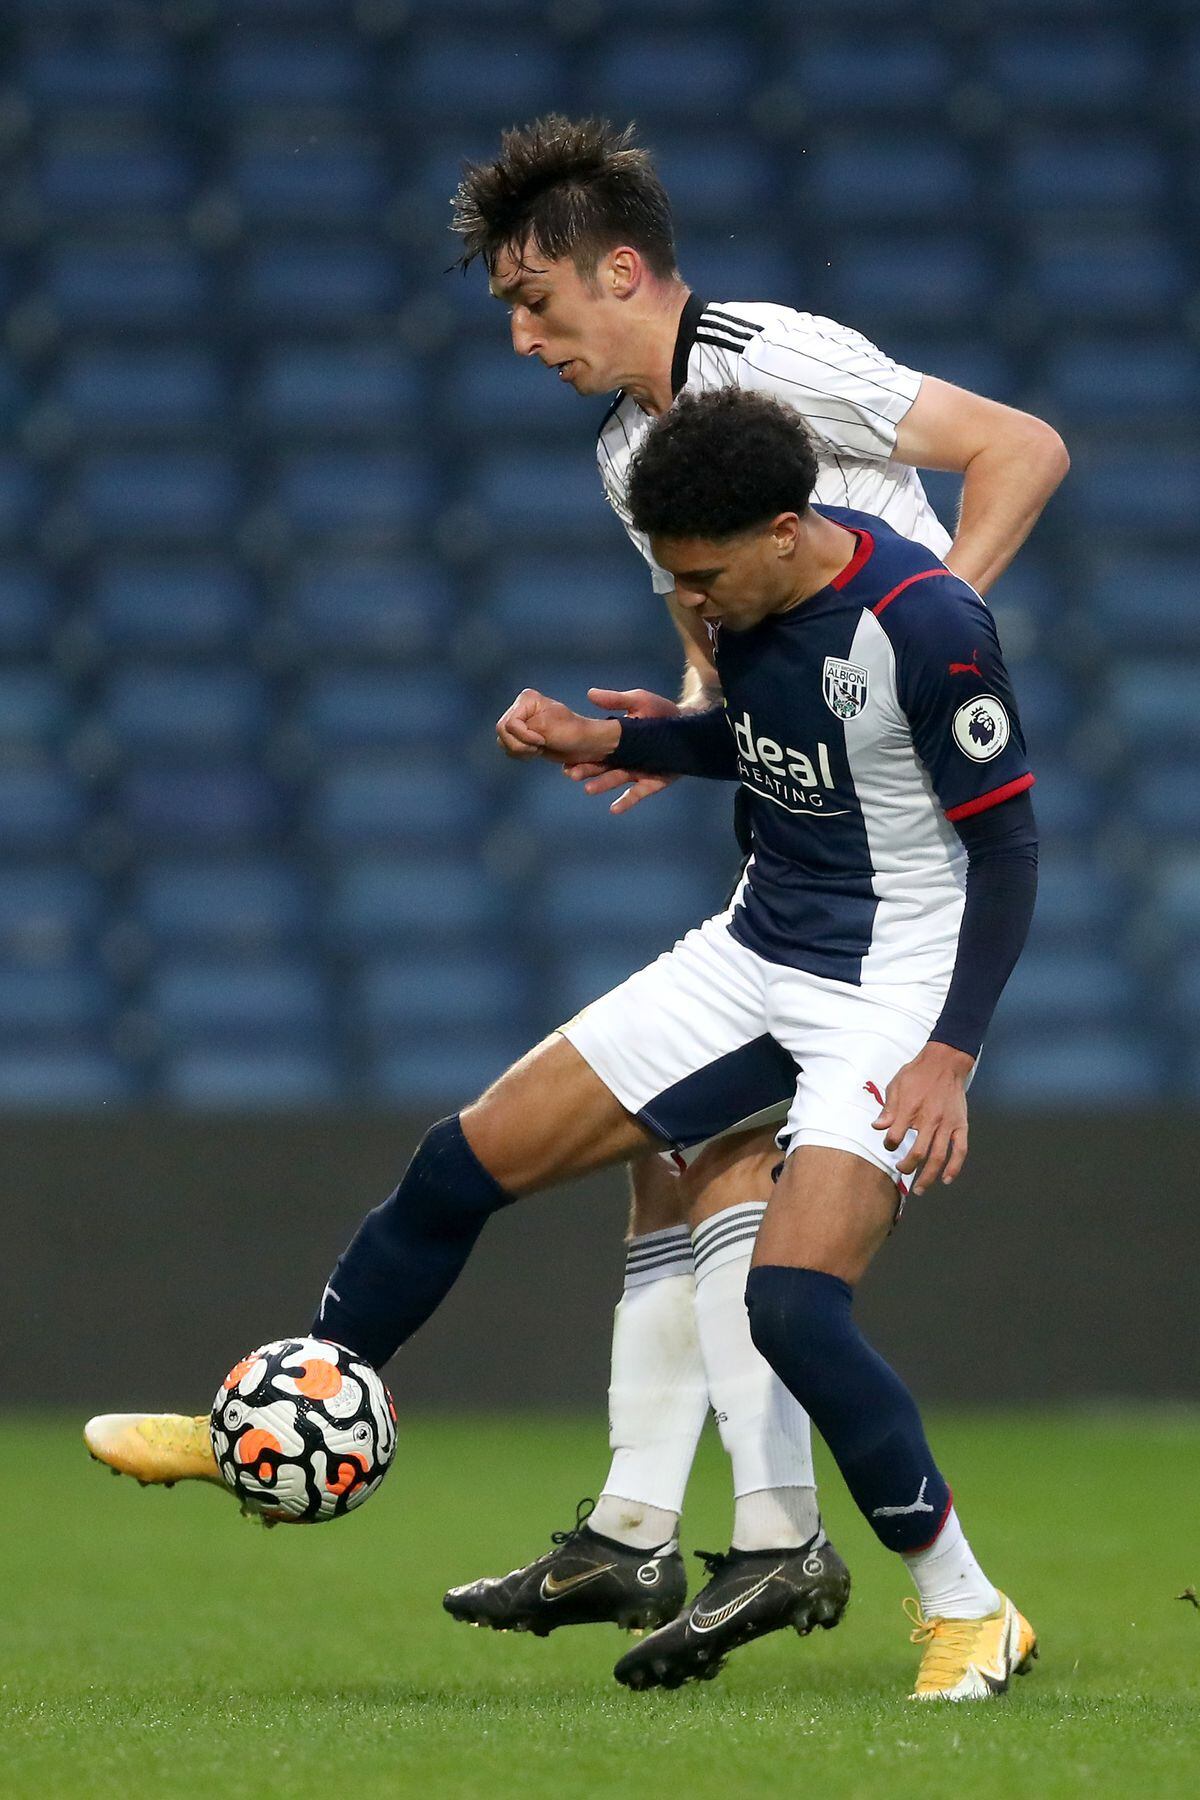 Kieron Bowie of Fulham and Ethan Ingram of West Bromwich Albion during the Premier League Cup / PL Cup at The Hawthorns on May 3, 2022 in West Bromwich, England. (Photo by Adam Fradgley/West Bromwich Albion FC via Getty Images)...